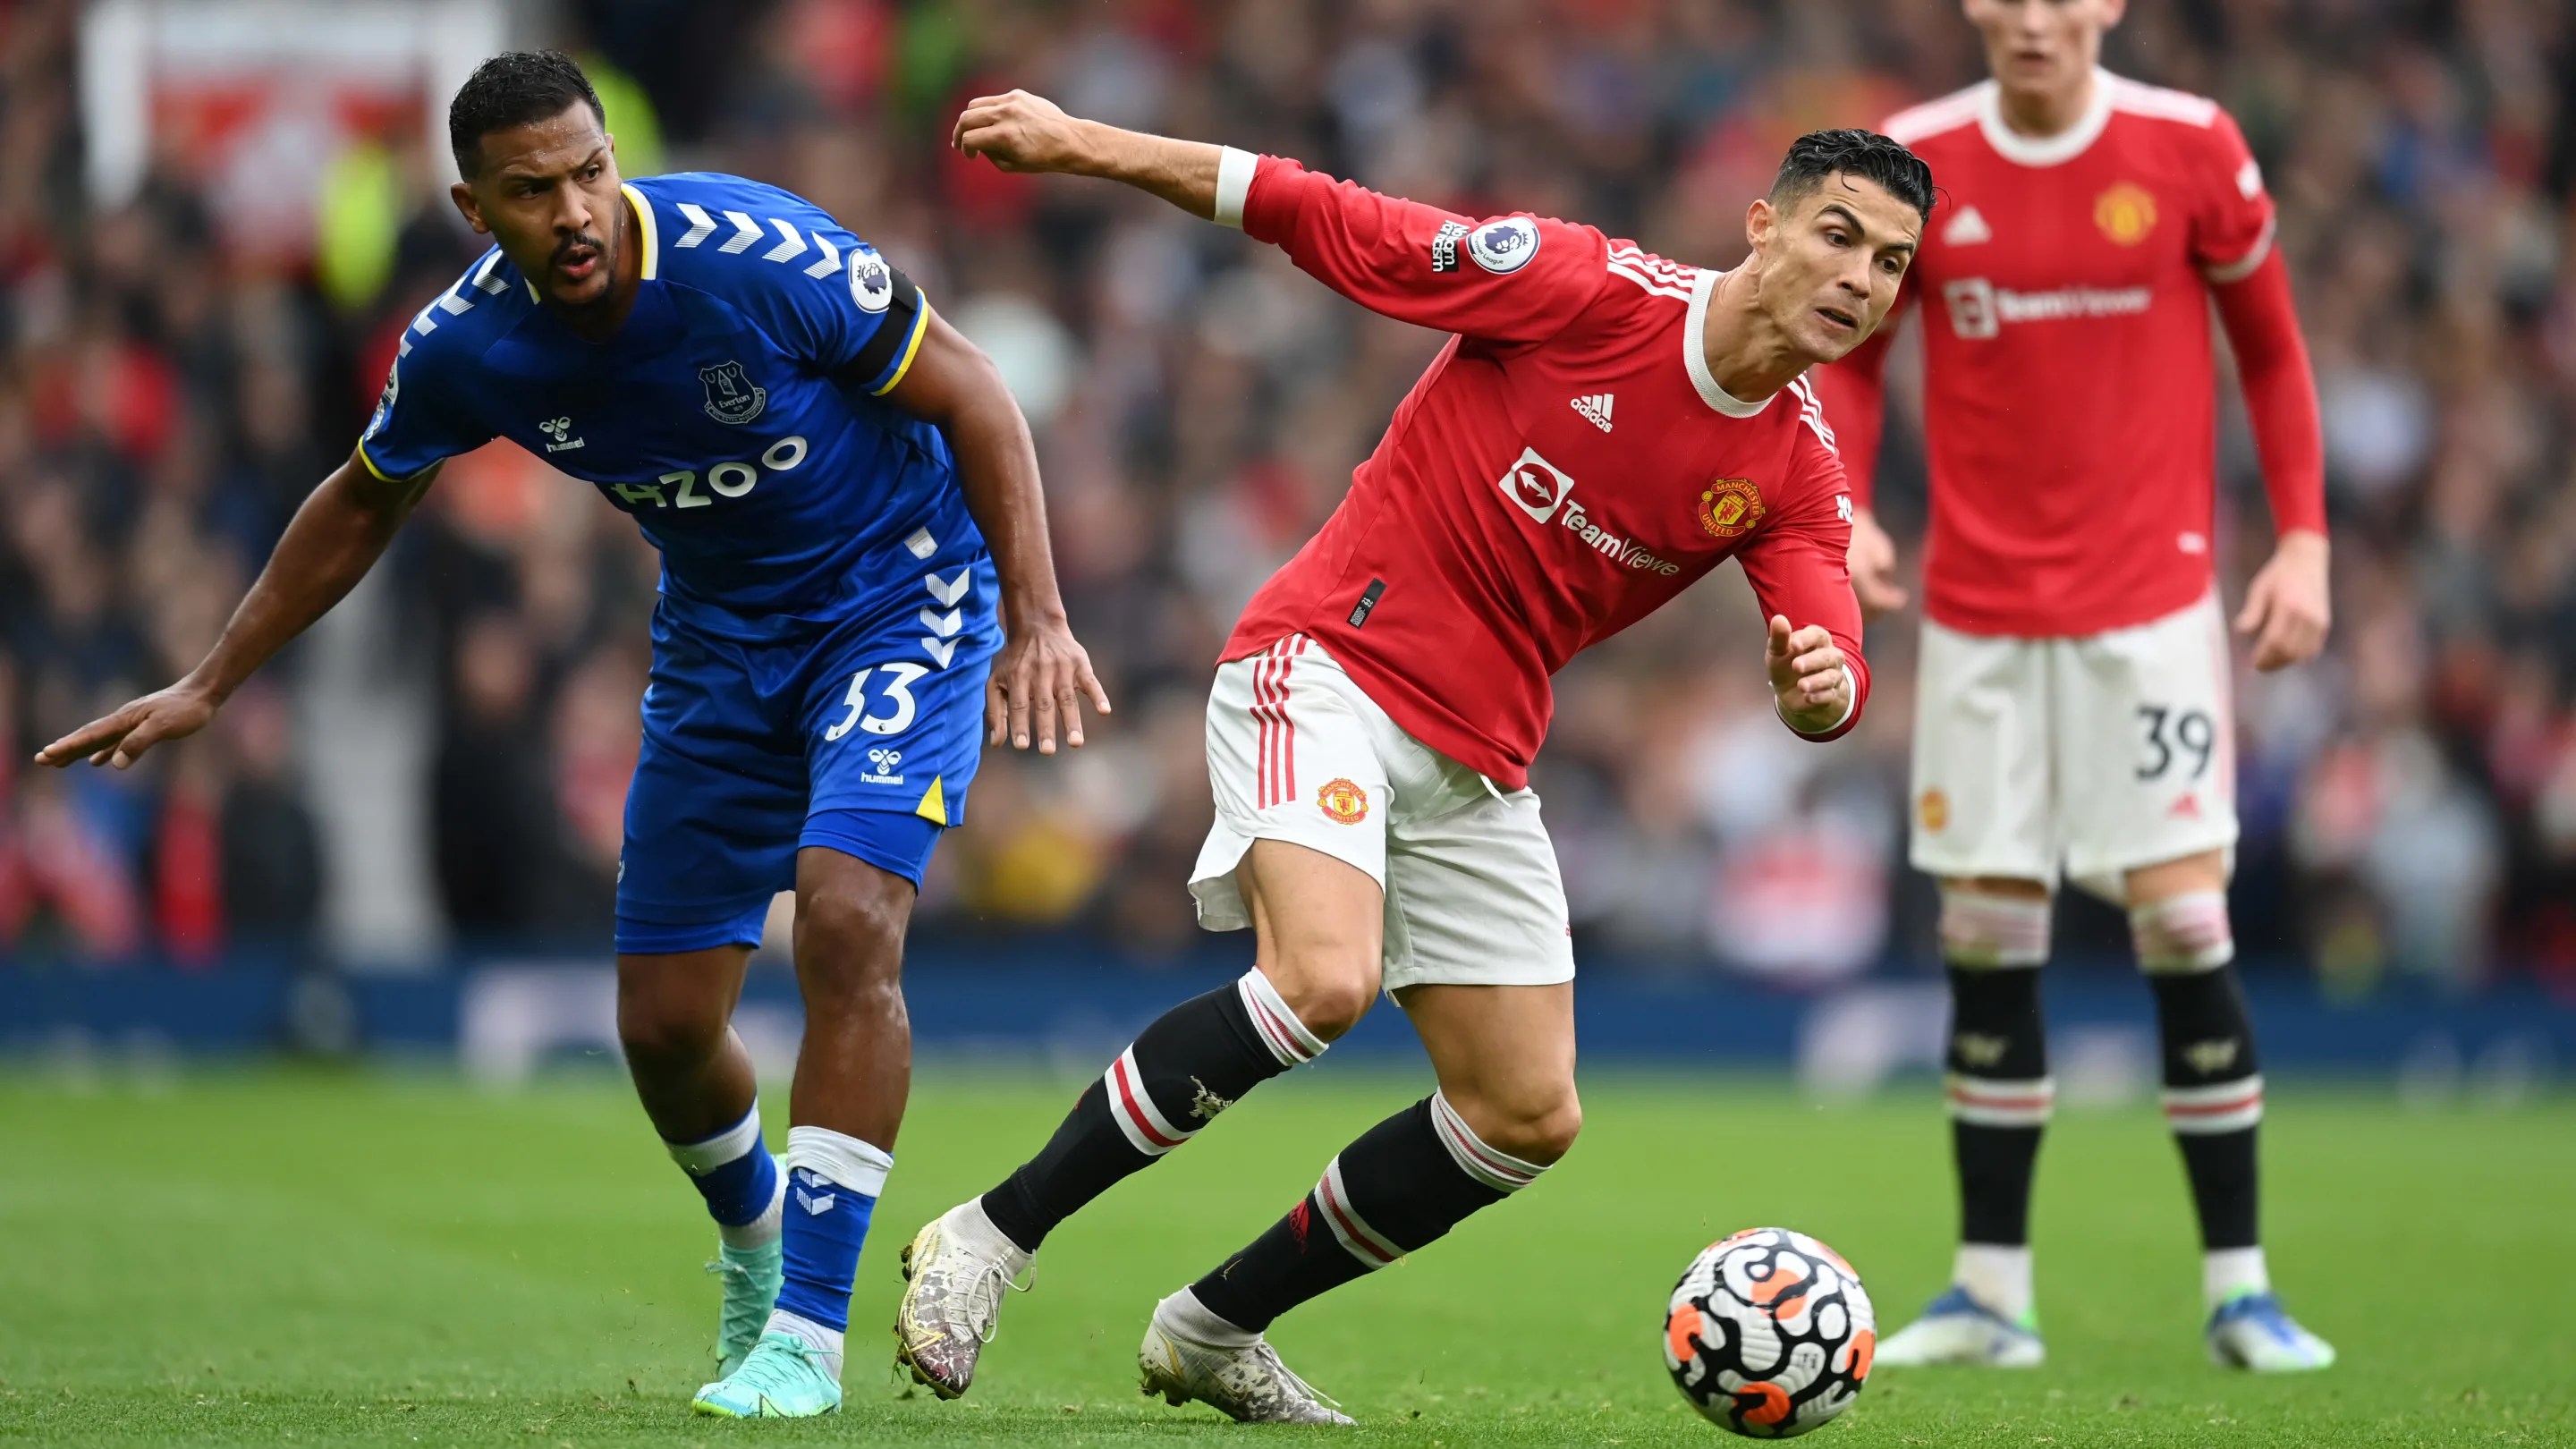 Everton vs Manchester United Live: Cristiano Ronaldo to start as Man United fight for a Champions League spot; Latest Team News, Injuries and suspensions Predicted Starting Lineups, Live Streaming